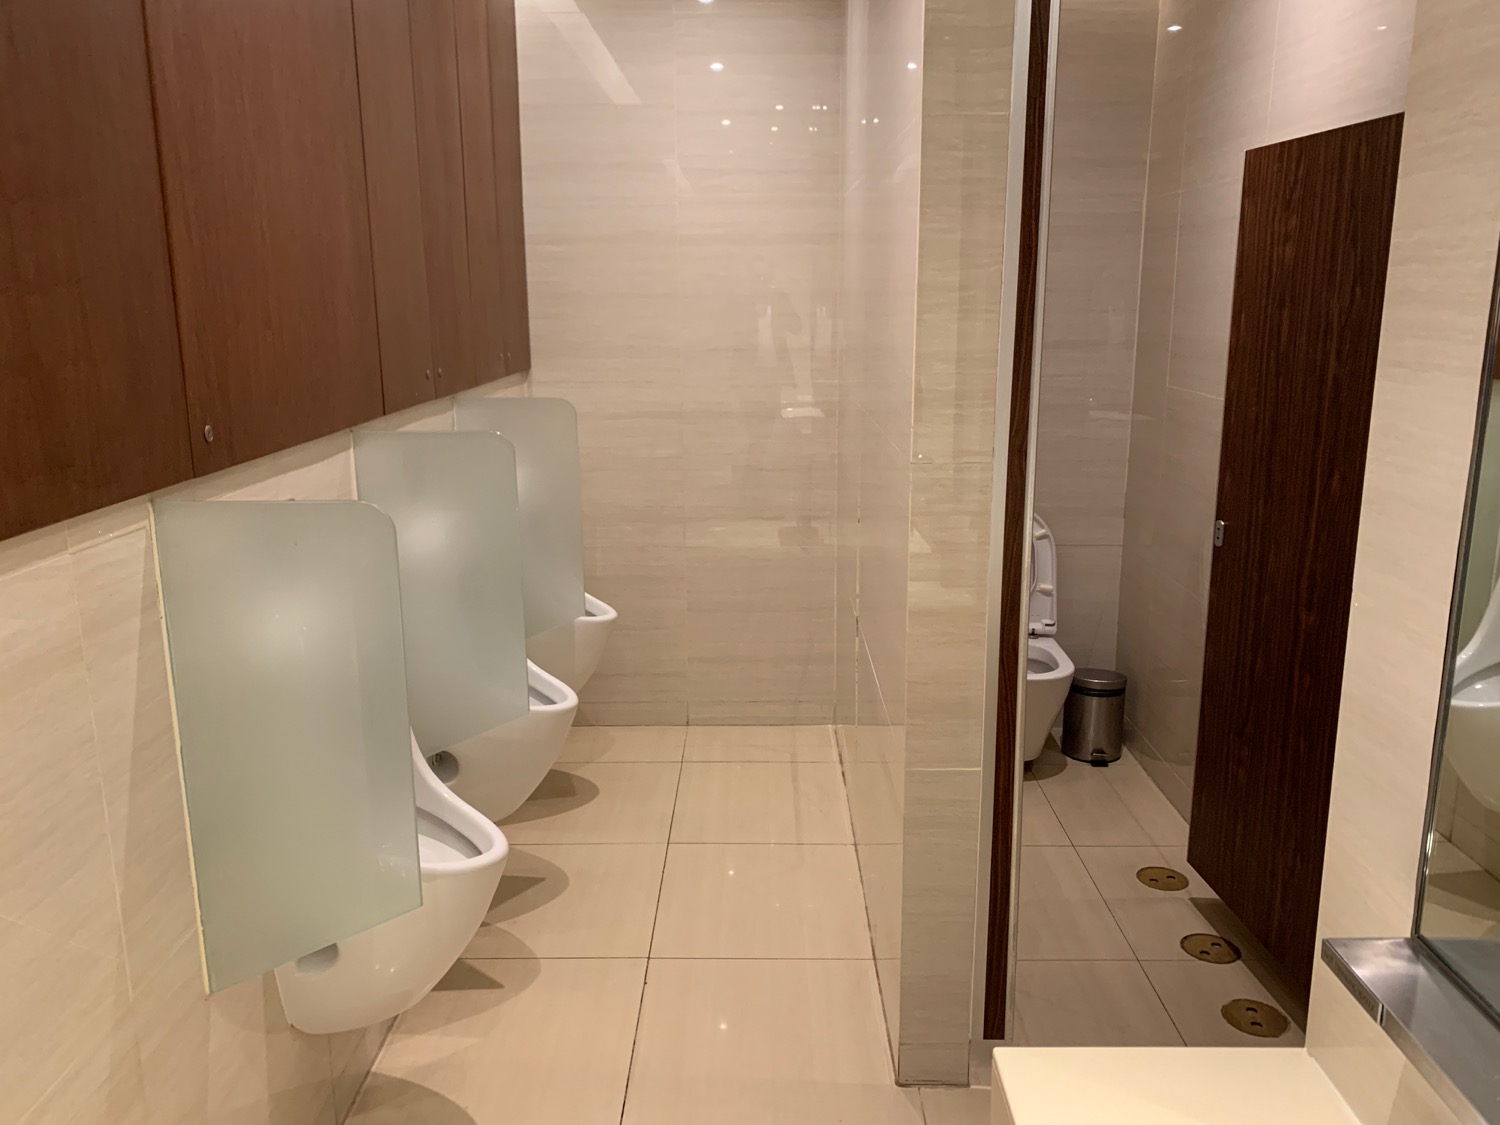 a bathroom with urinals and a shower